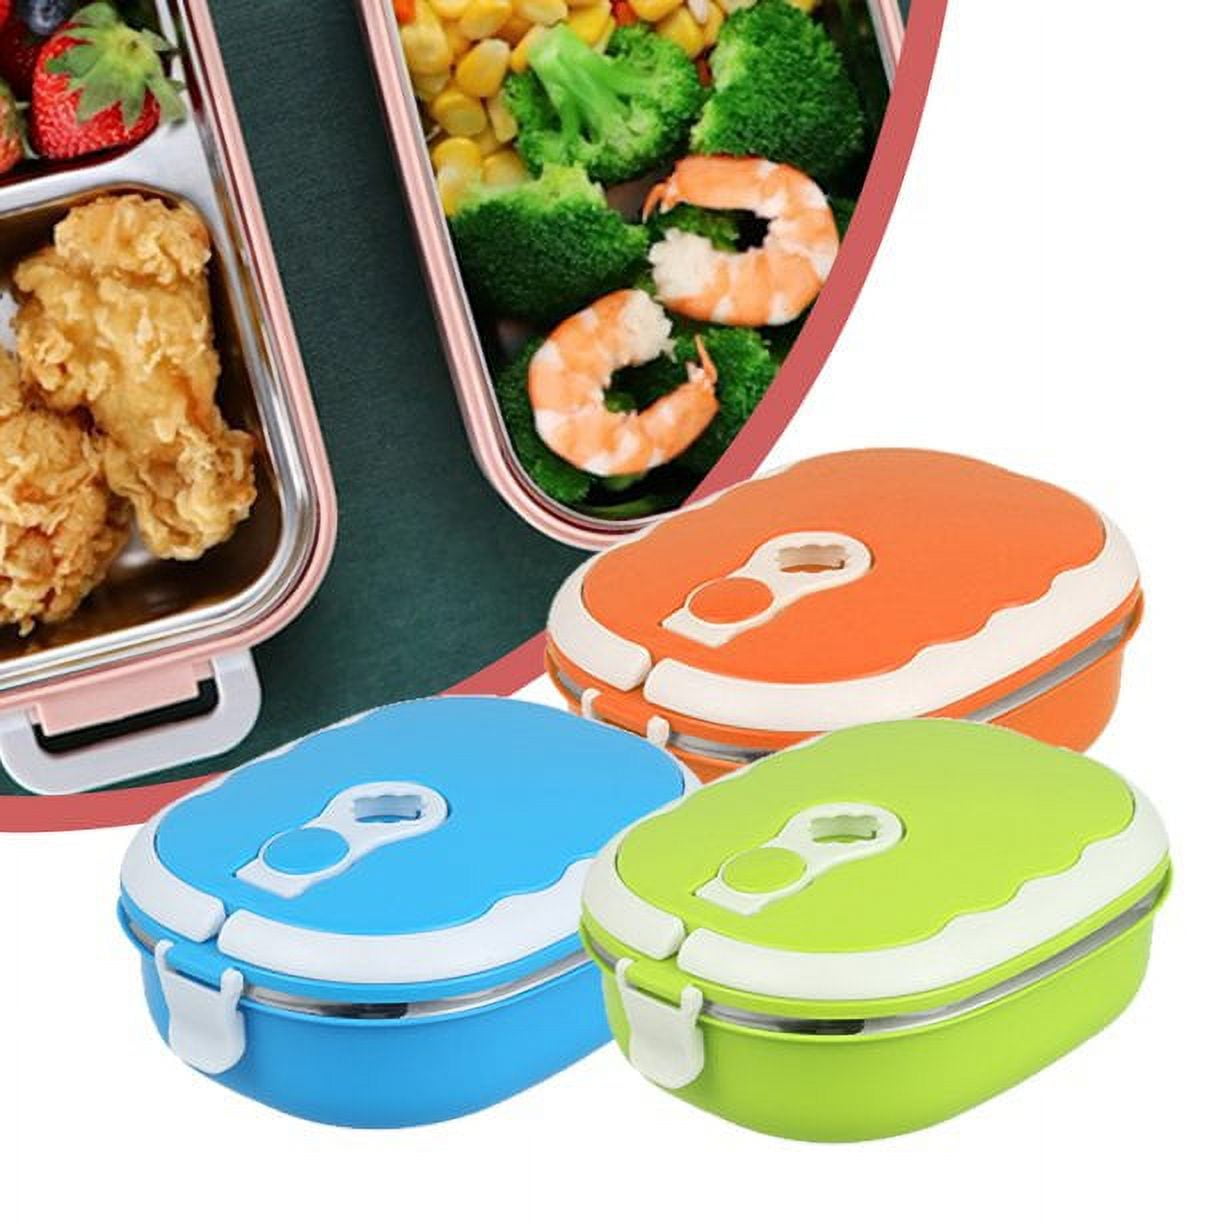 YBOBK HOME Cute Camera-Shape Portable Bento Box For Kids To School, 3  Compartments Divided Lunch Container Thermal Lunch Box For Food, Stainless  Steel